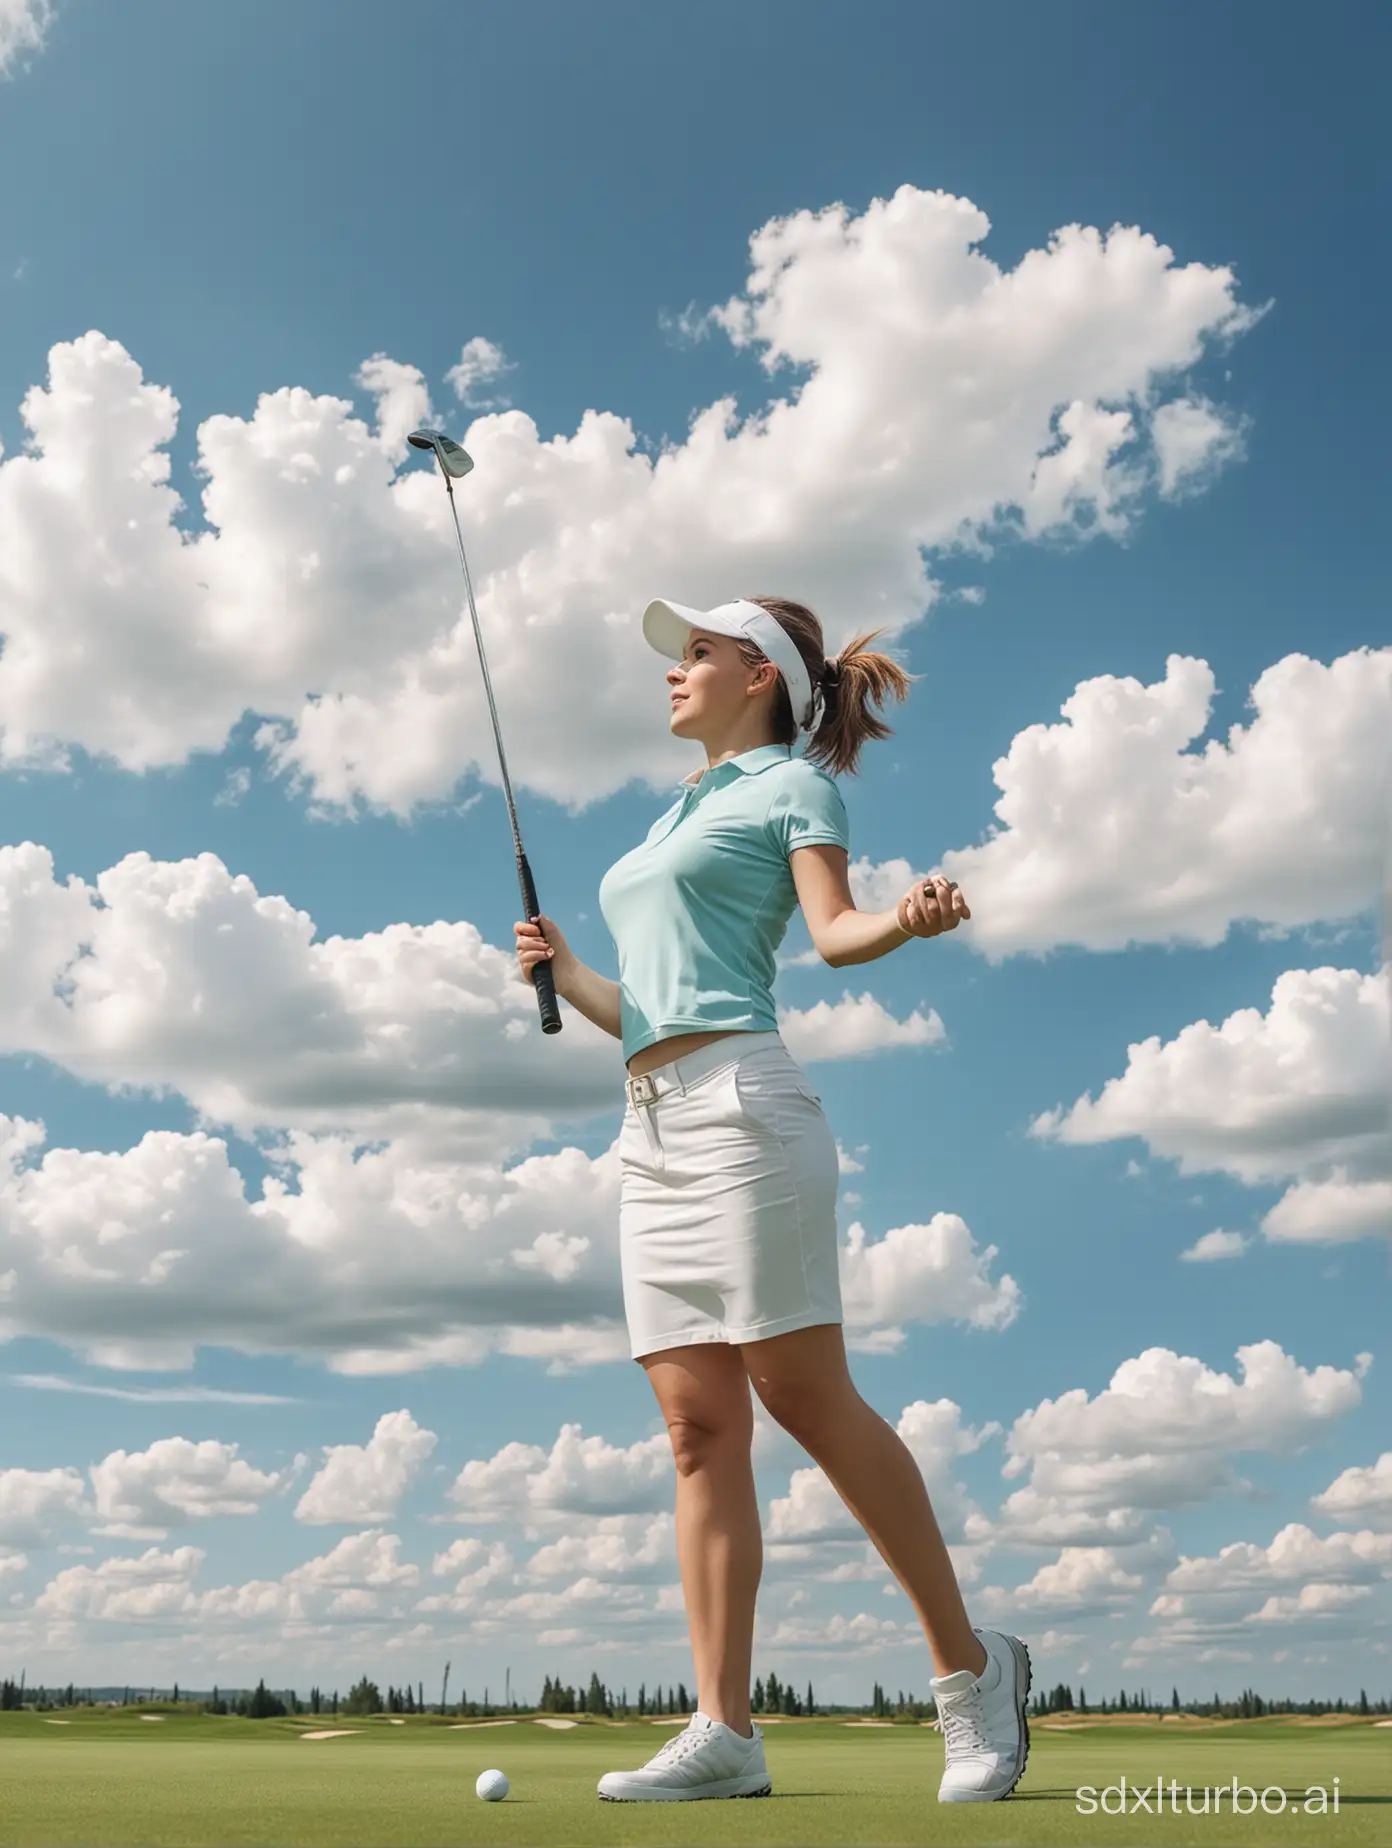 Woman-Playing-Golf-Under-Clear-Blue-Sky